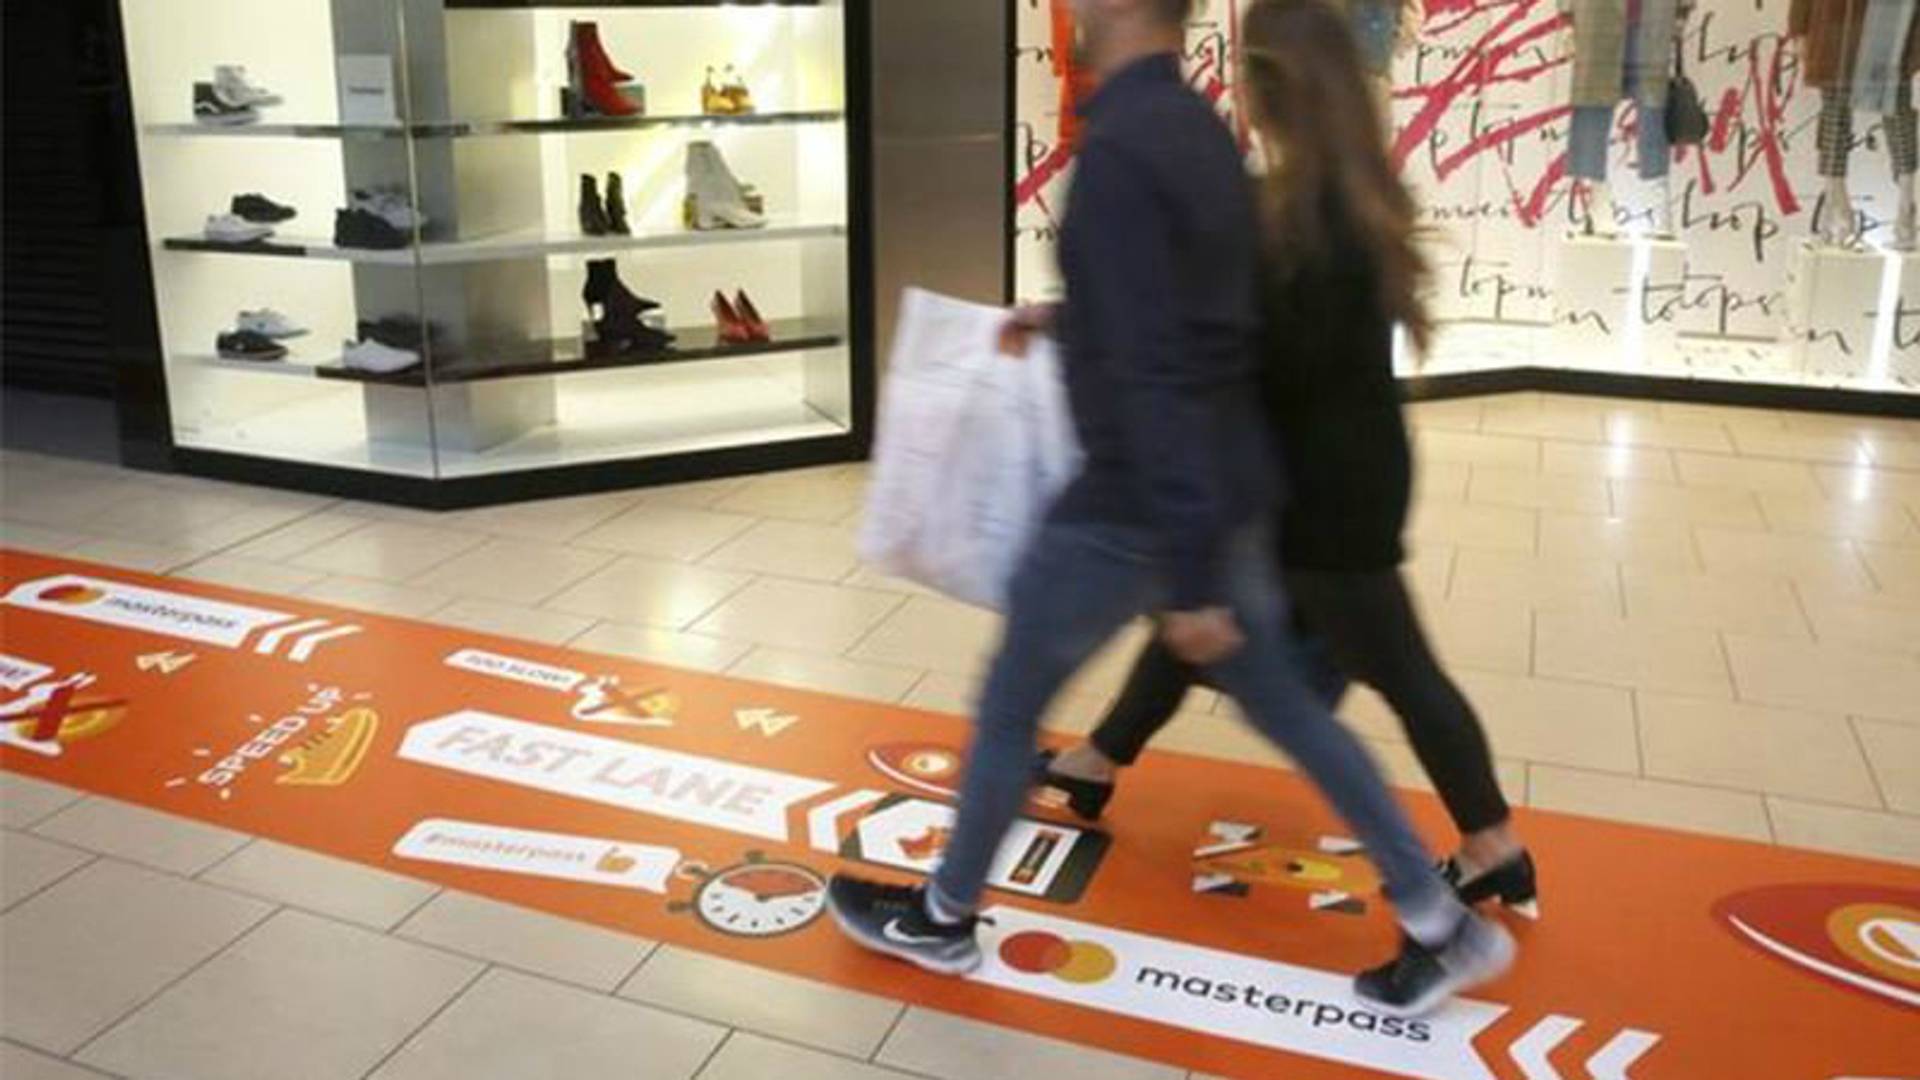 Lakeside has 'fast lanes' for shoppers in a hurry